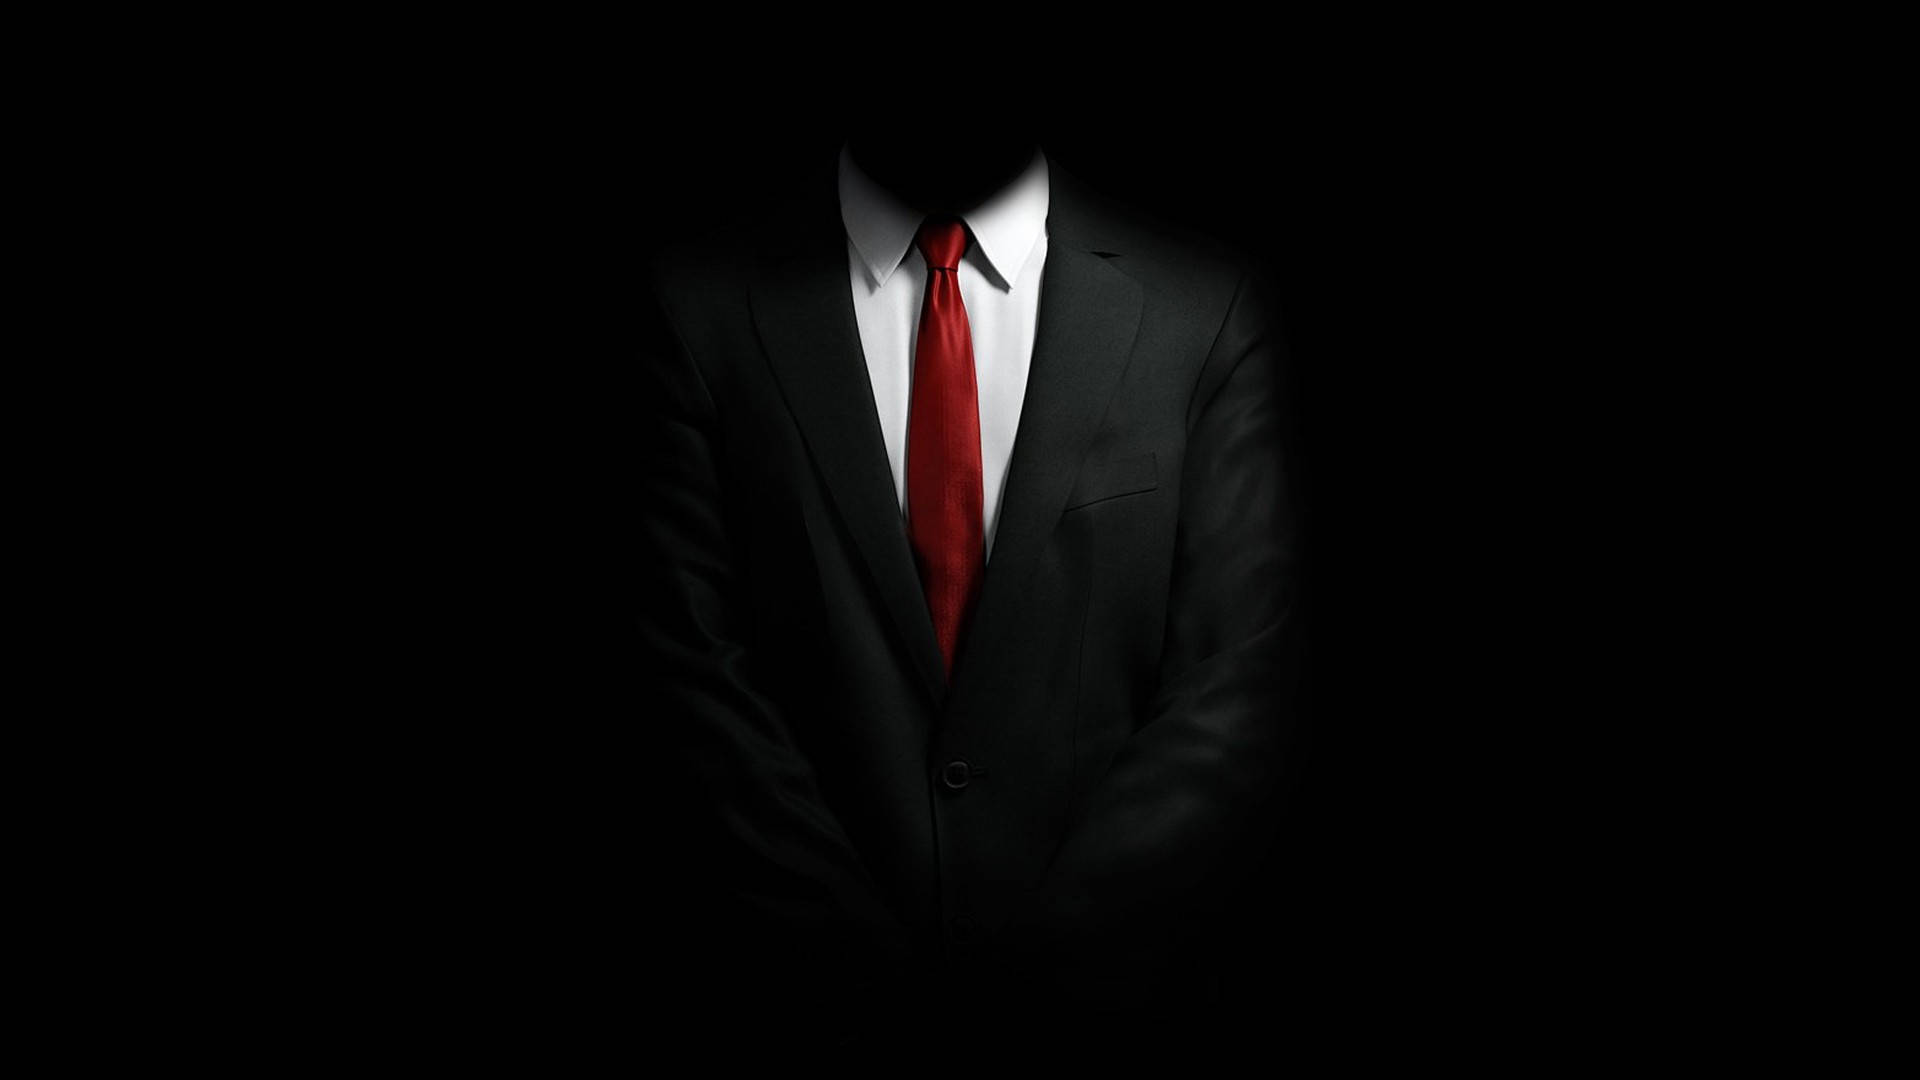 Hitman Hd Iconic Suit And Tie Background